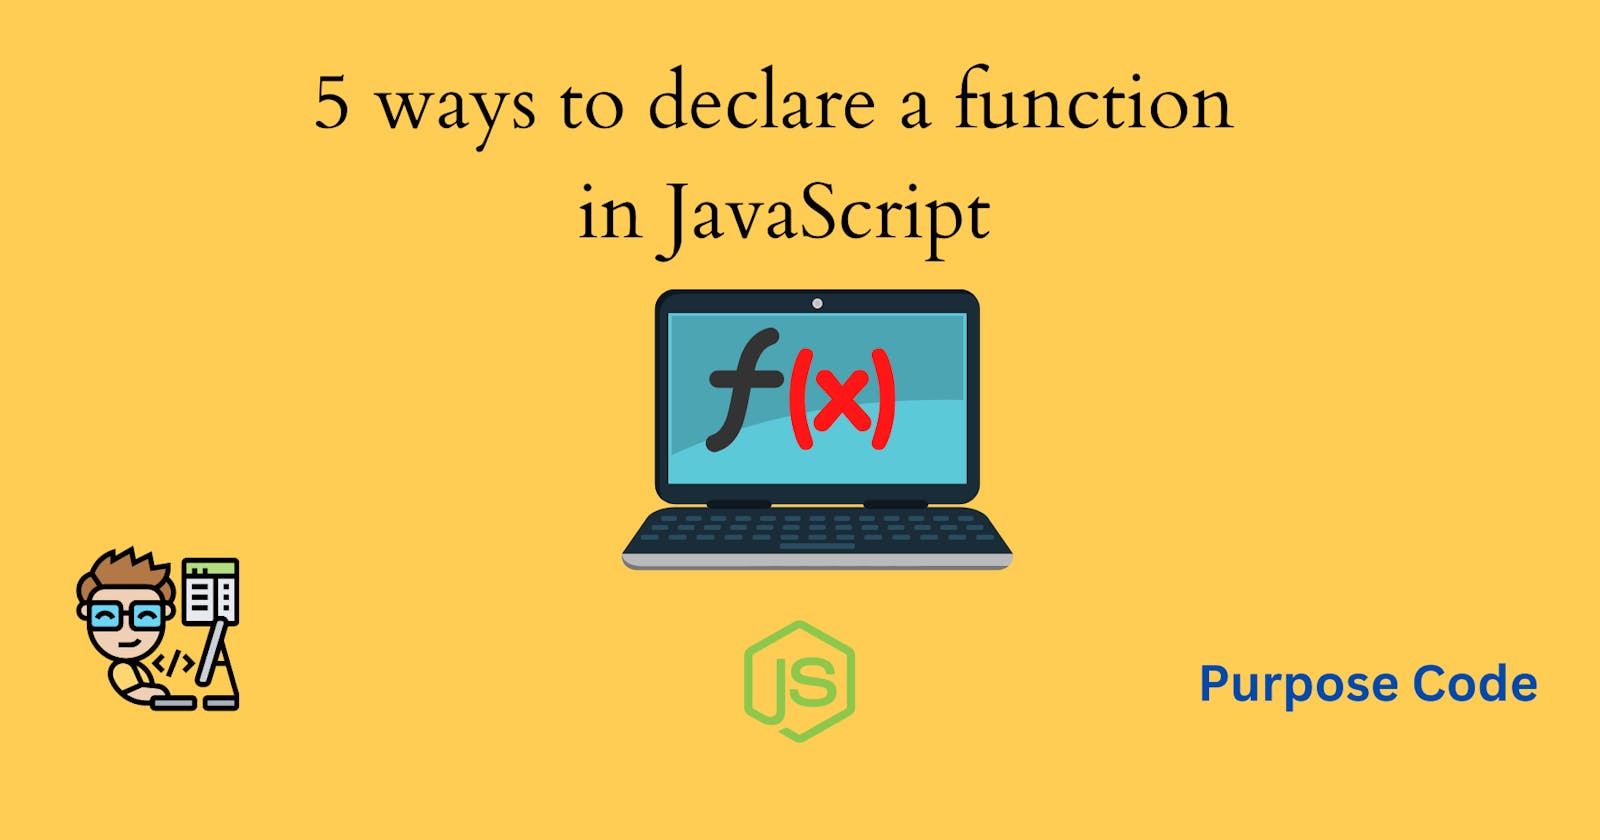 5 ways to declare a function in JavaScript